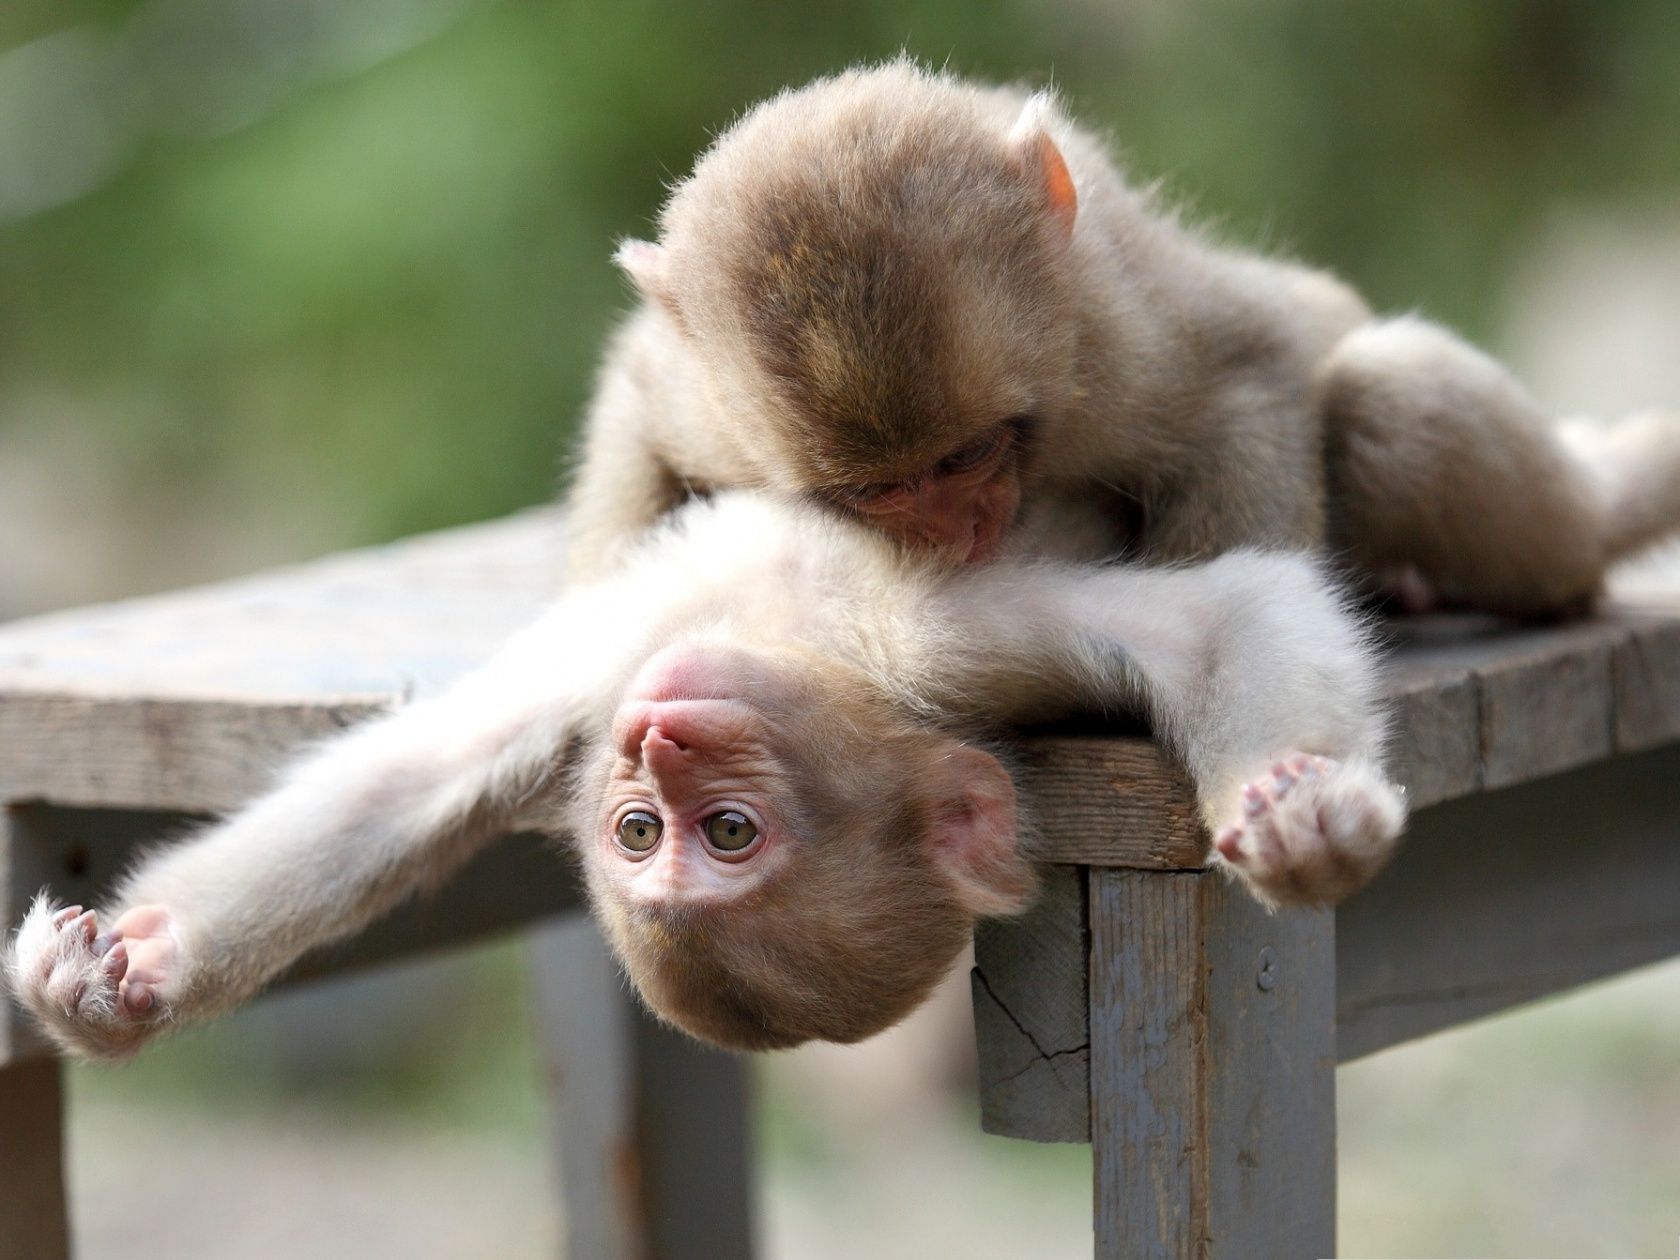 Baby-Monkeys-Picture-Cute-Monkey-Playing-with-Each-Other-Close-Relationship.jpg